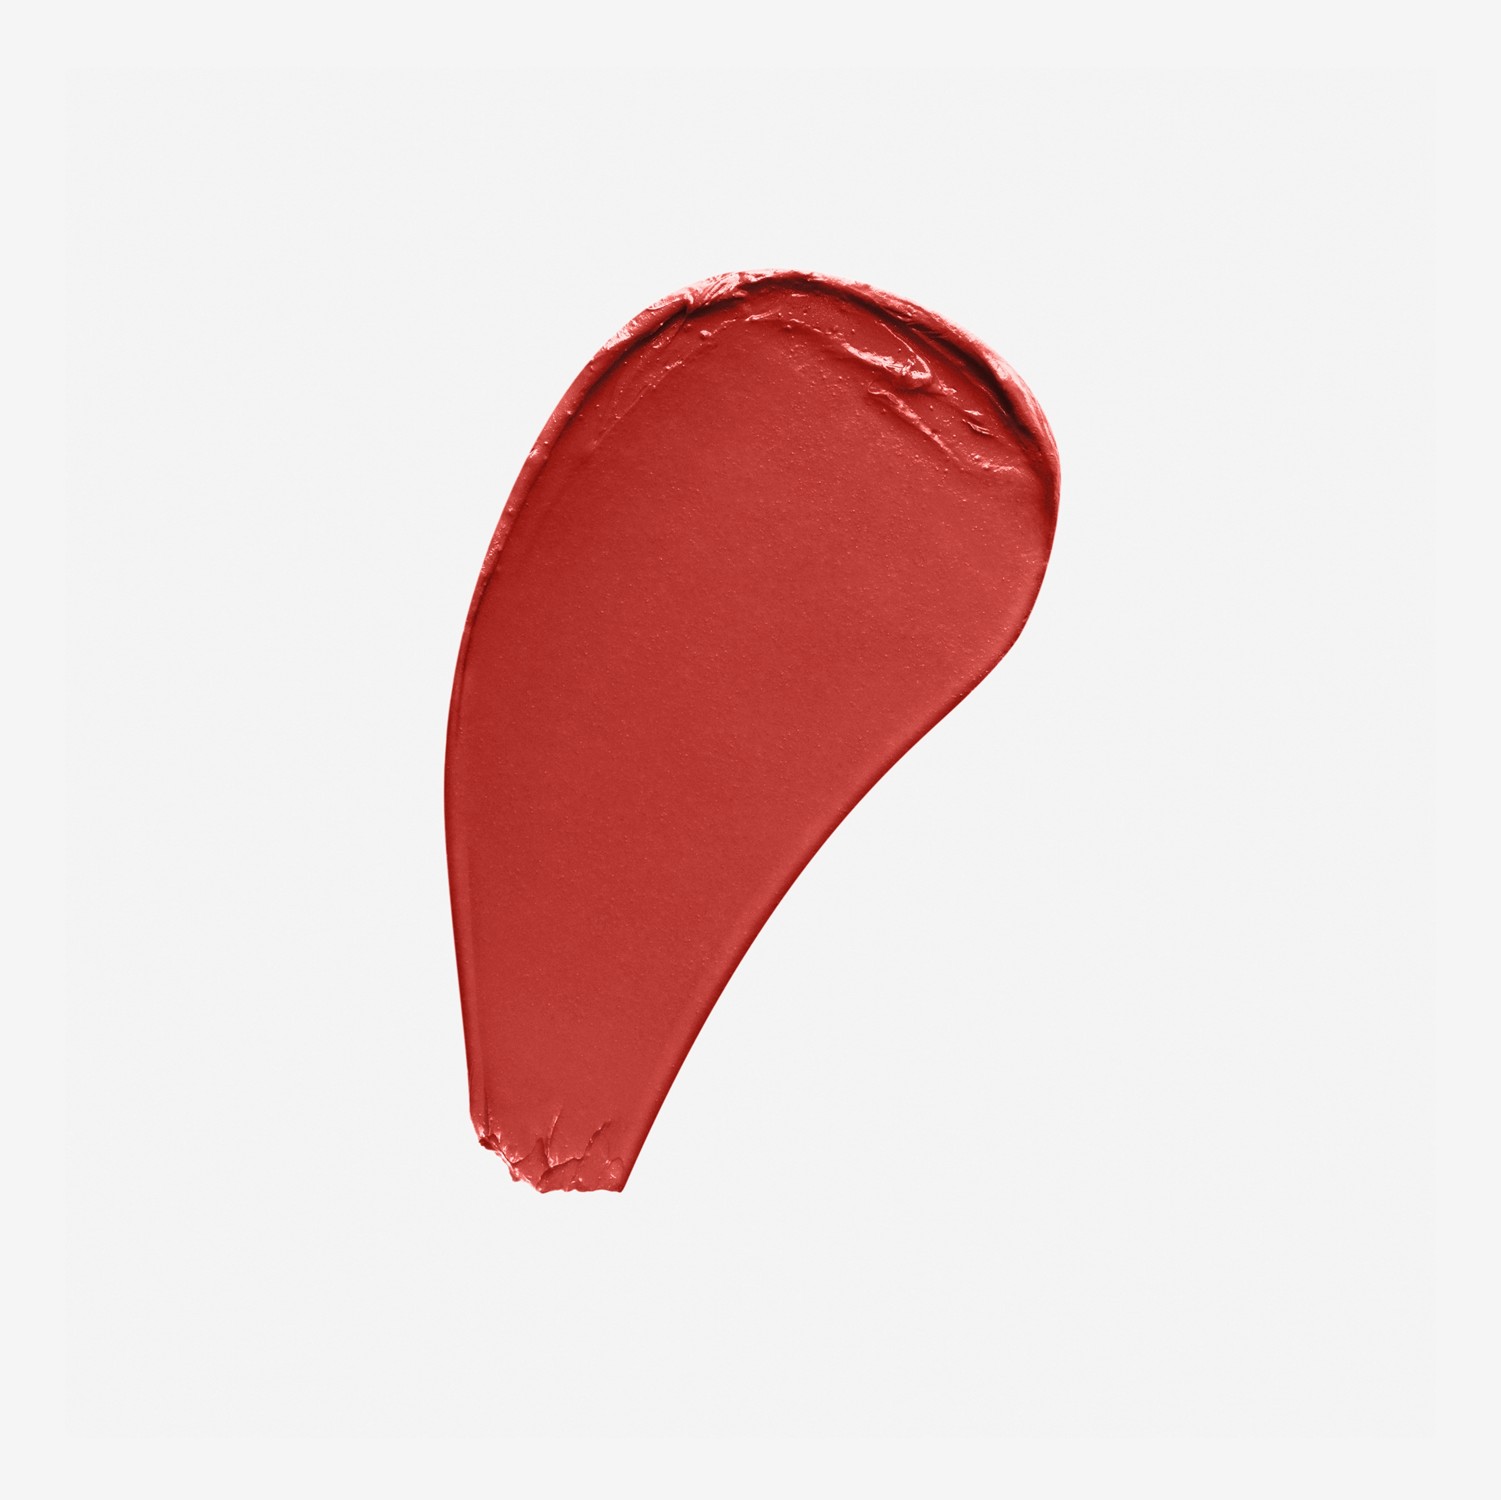 Burberry Kisses Matte – Burnished Red No.117